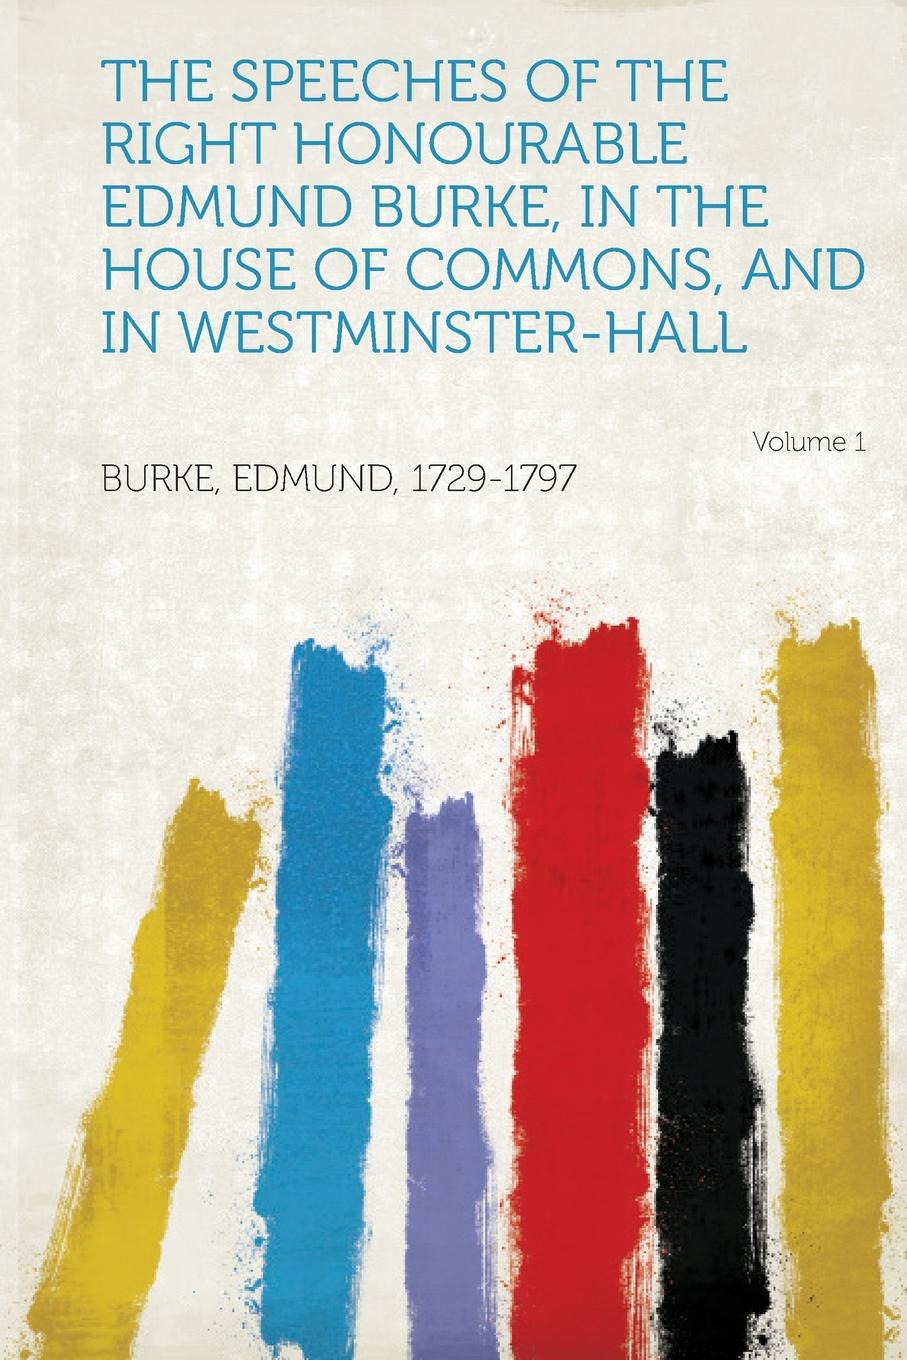 The Speeches of the Right Honourable Edmund Burke, in the House of Commons, and in Westminster-Hall Volume 1